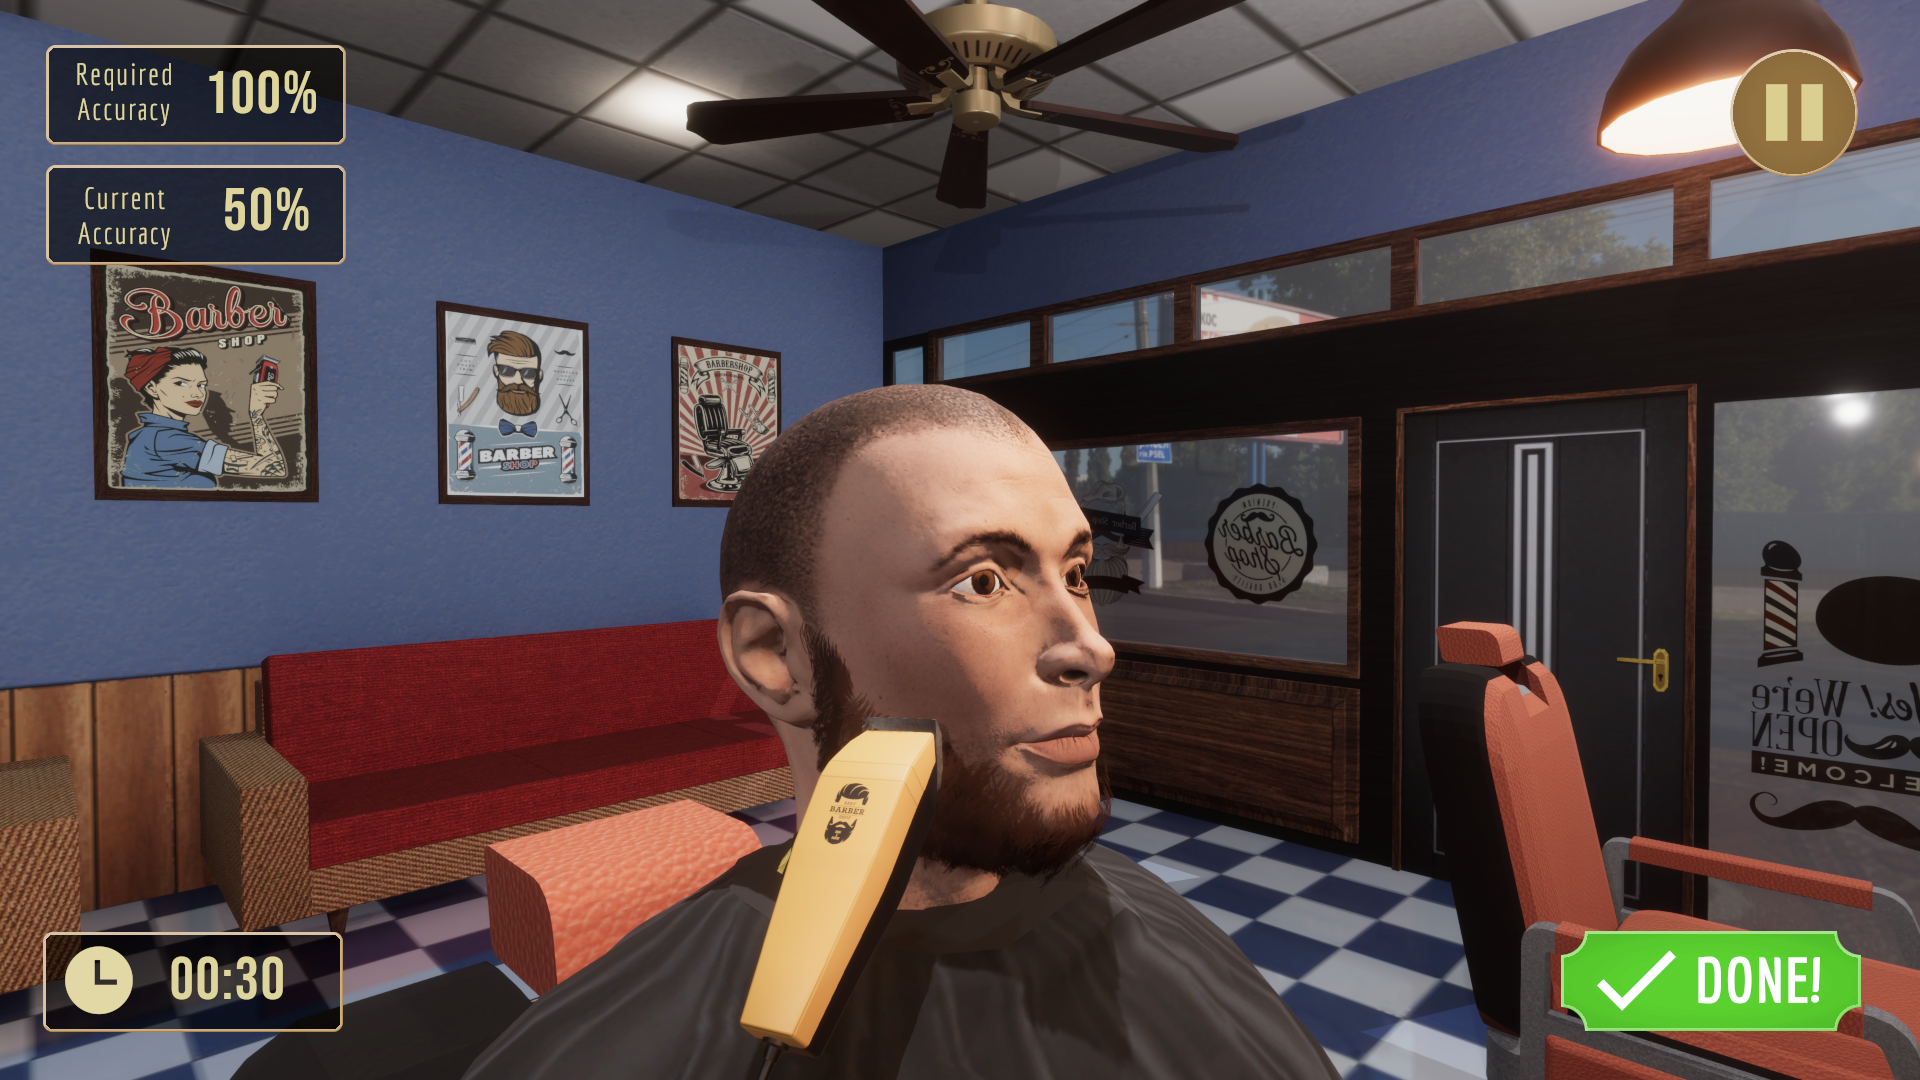 Barber Shop Beard Salon and Hair Style Games Apk Download for